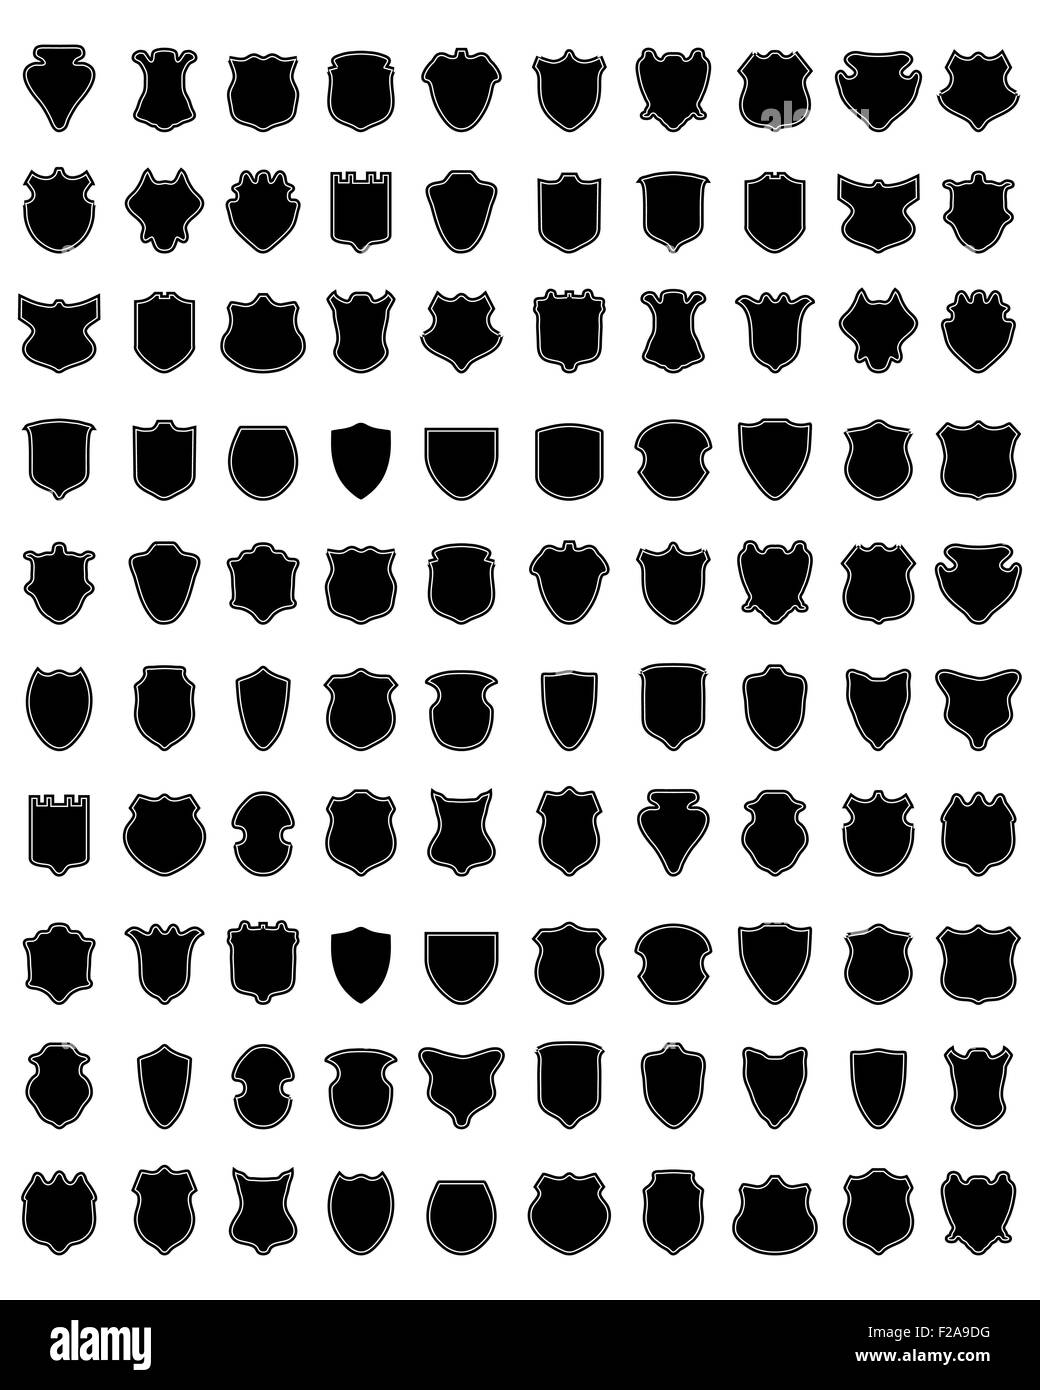 Black and white silhouettes of shields, vector Stock Photo